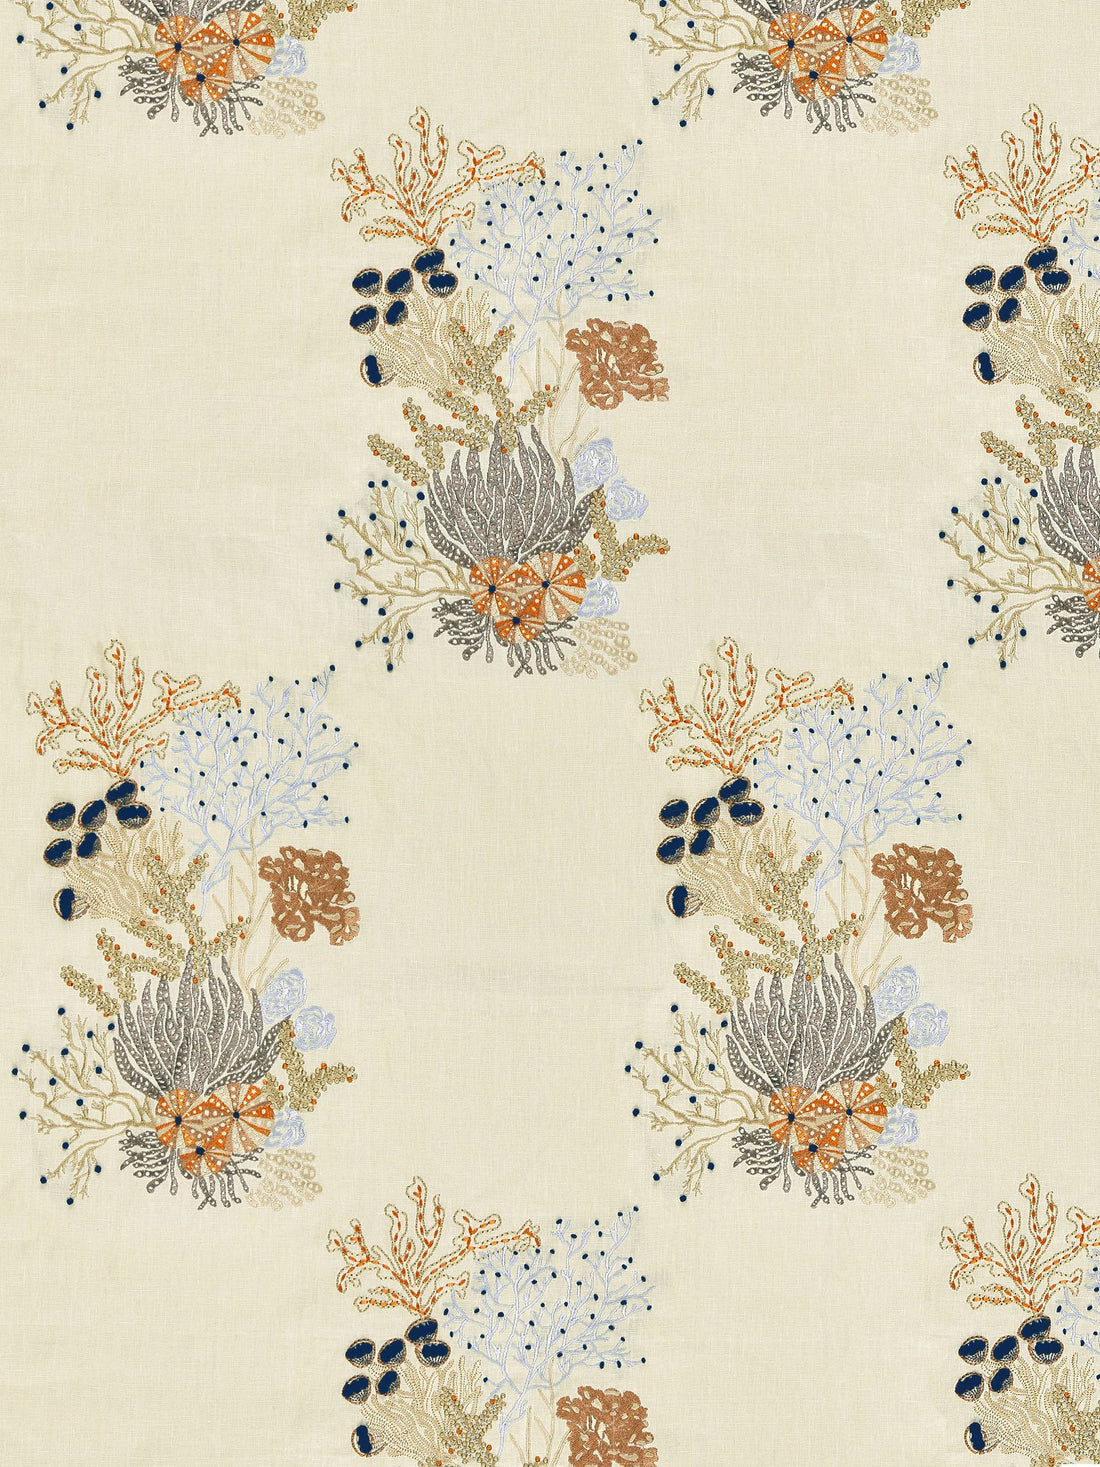 Combe Martin fabric in sand color - pattern number JM 00027072 - by Scalamandre in the Old World Weavers collection